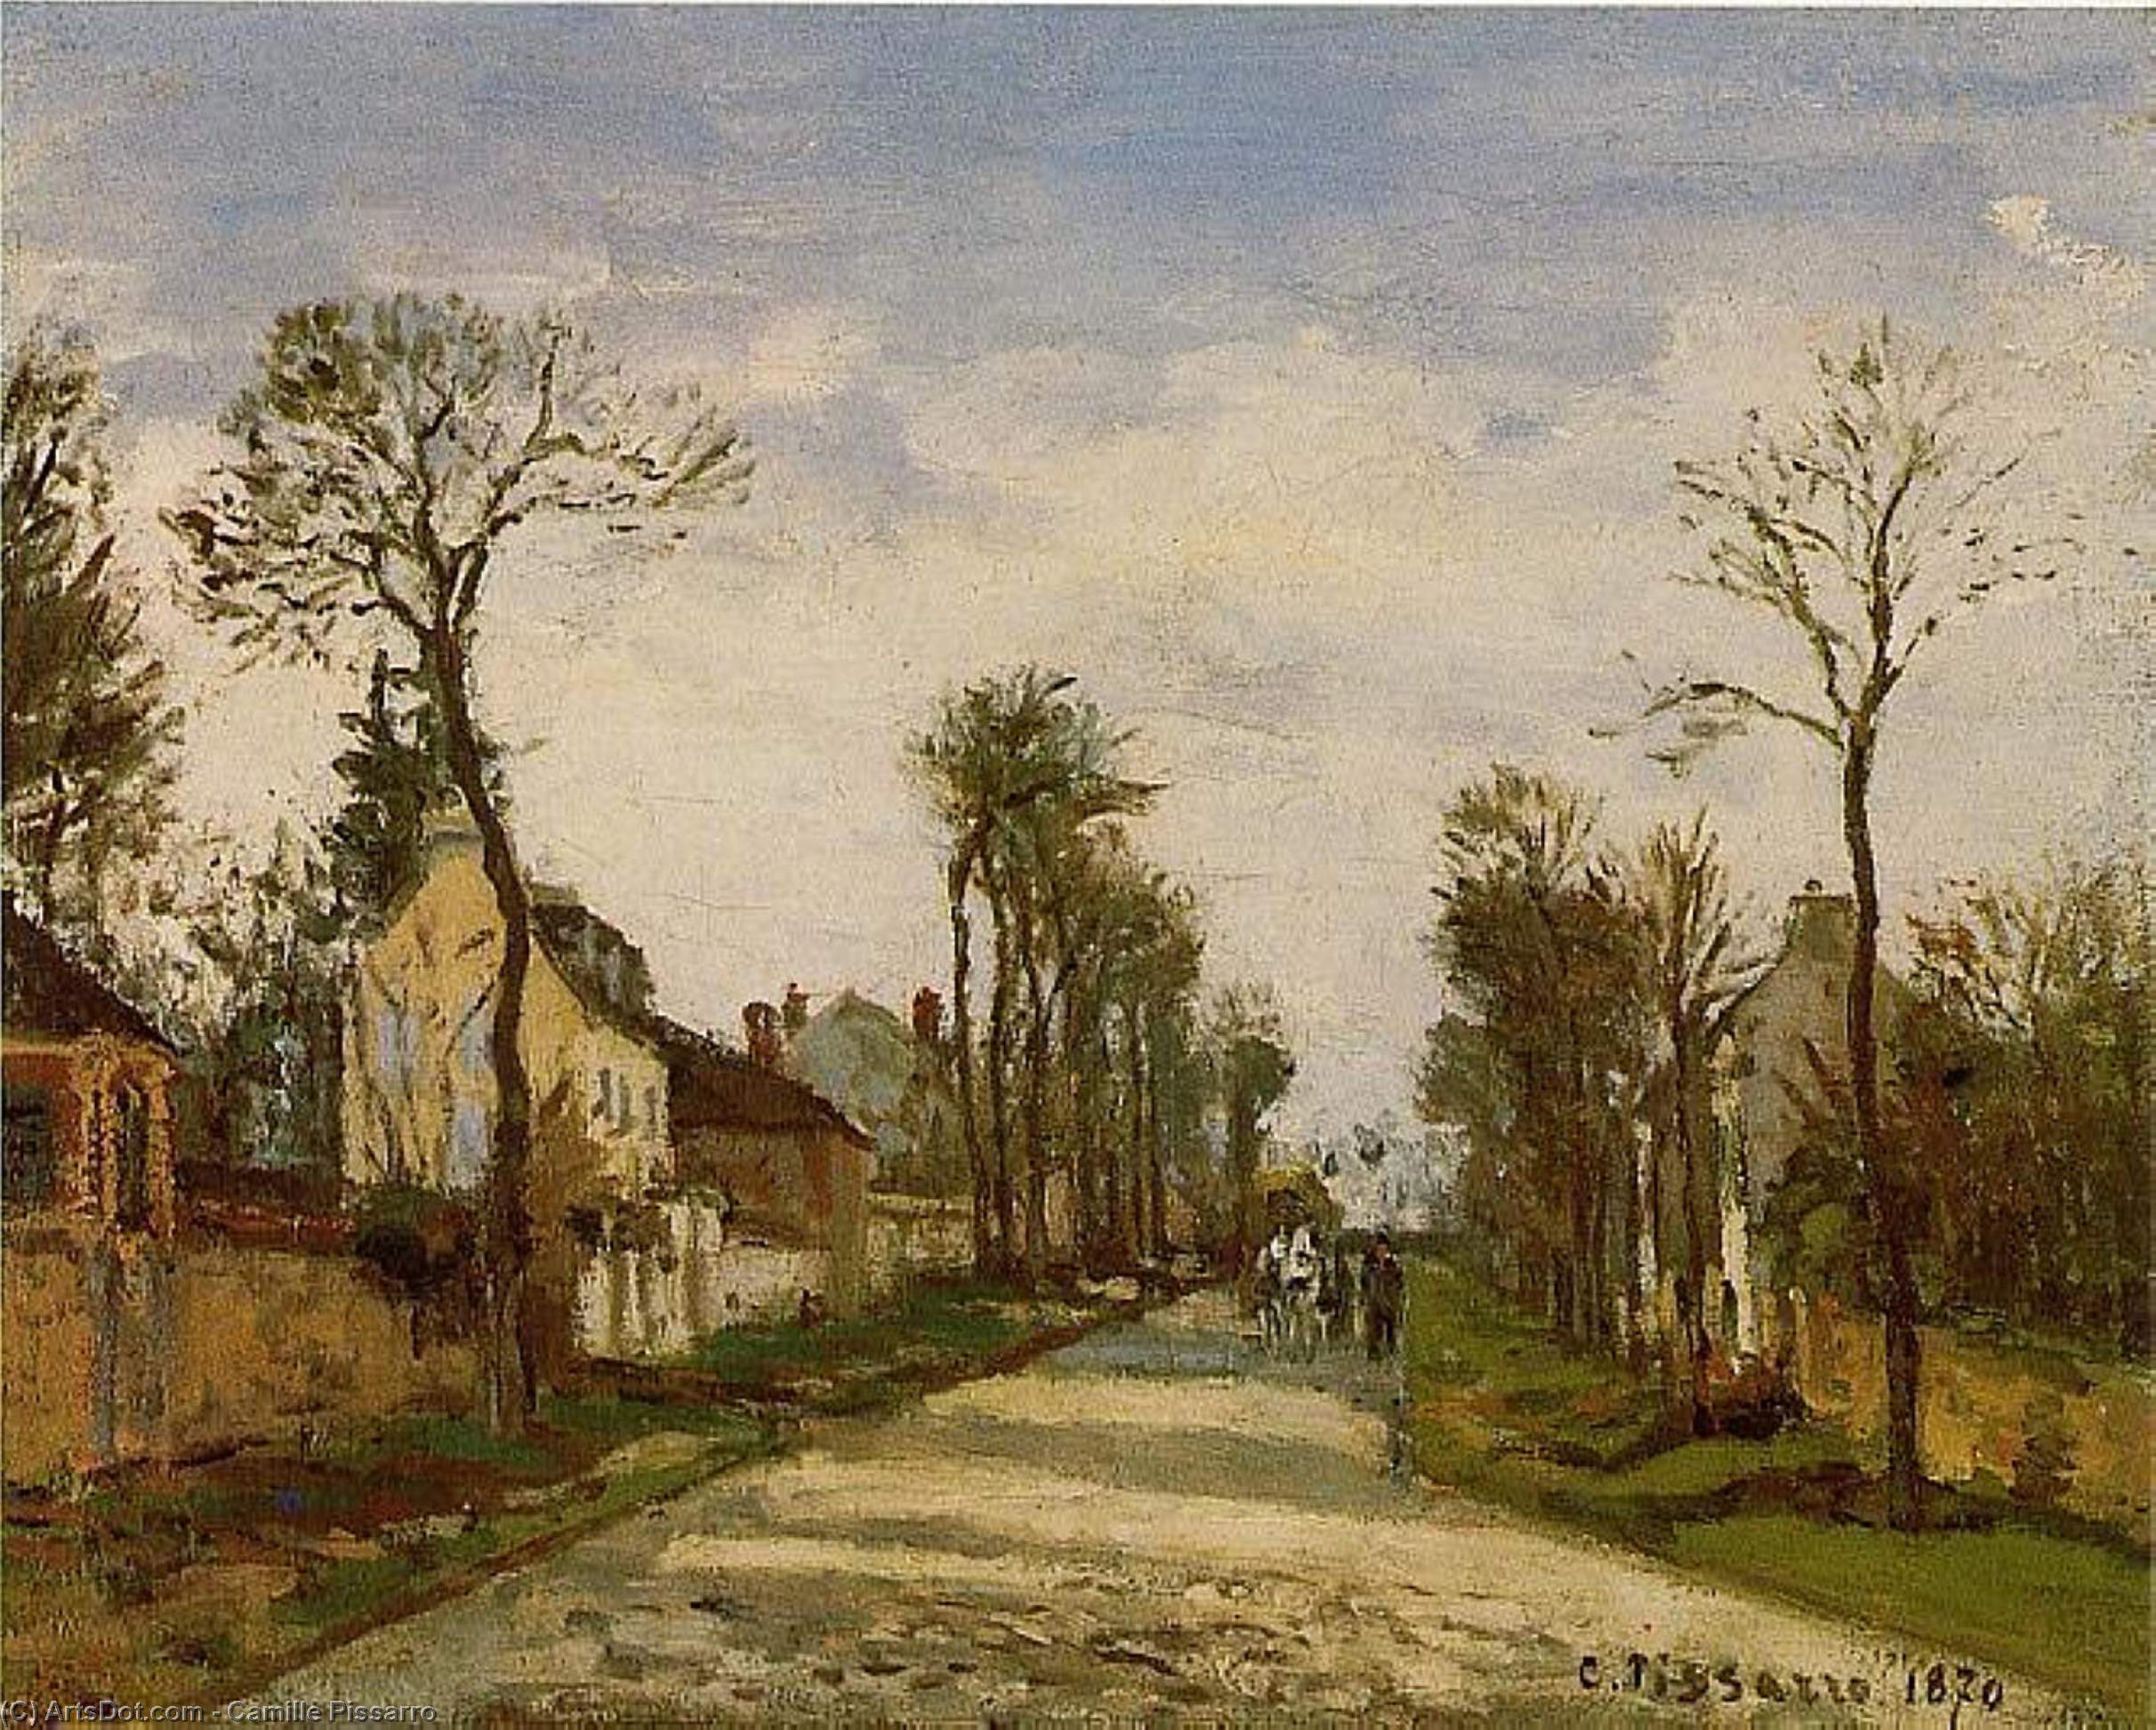 WikiOO.org - Encyclopedia of Fine Arts - Lukisan, Artwork Camille Pissarro - The Road to Caint-Cyr at Louveciennes